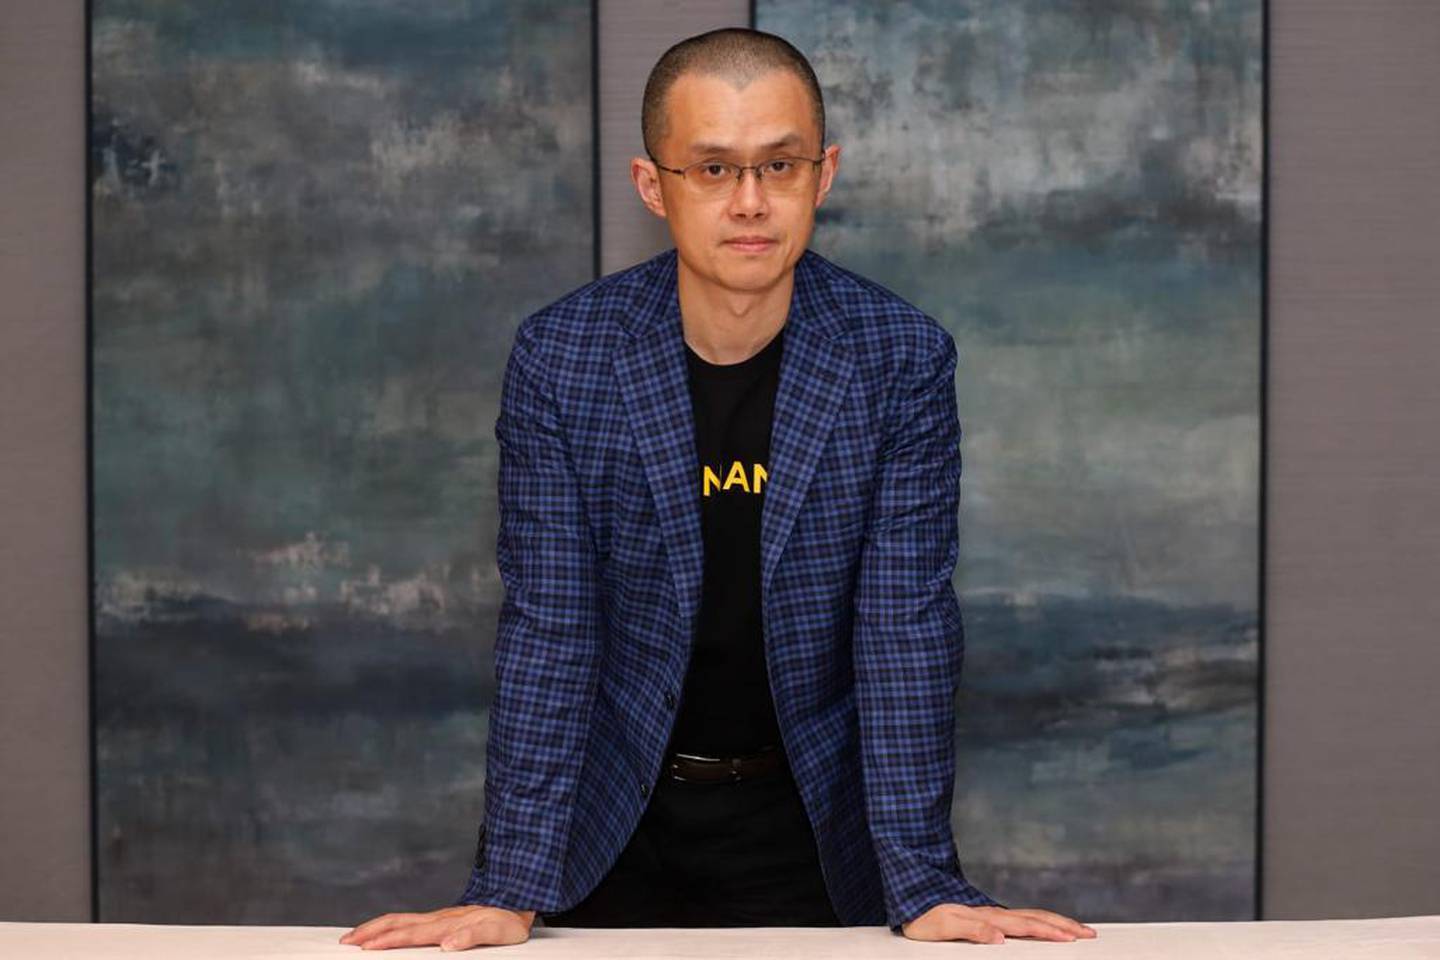 Changpeng Zhao, founder and CEO of Binance